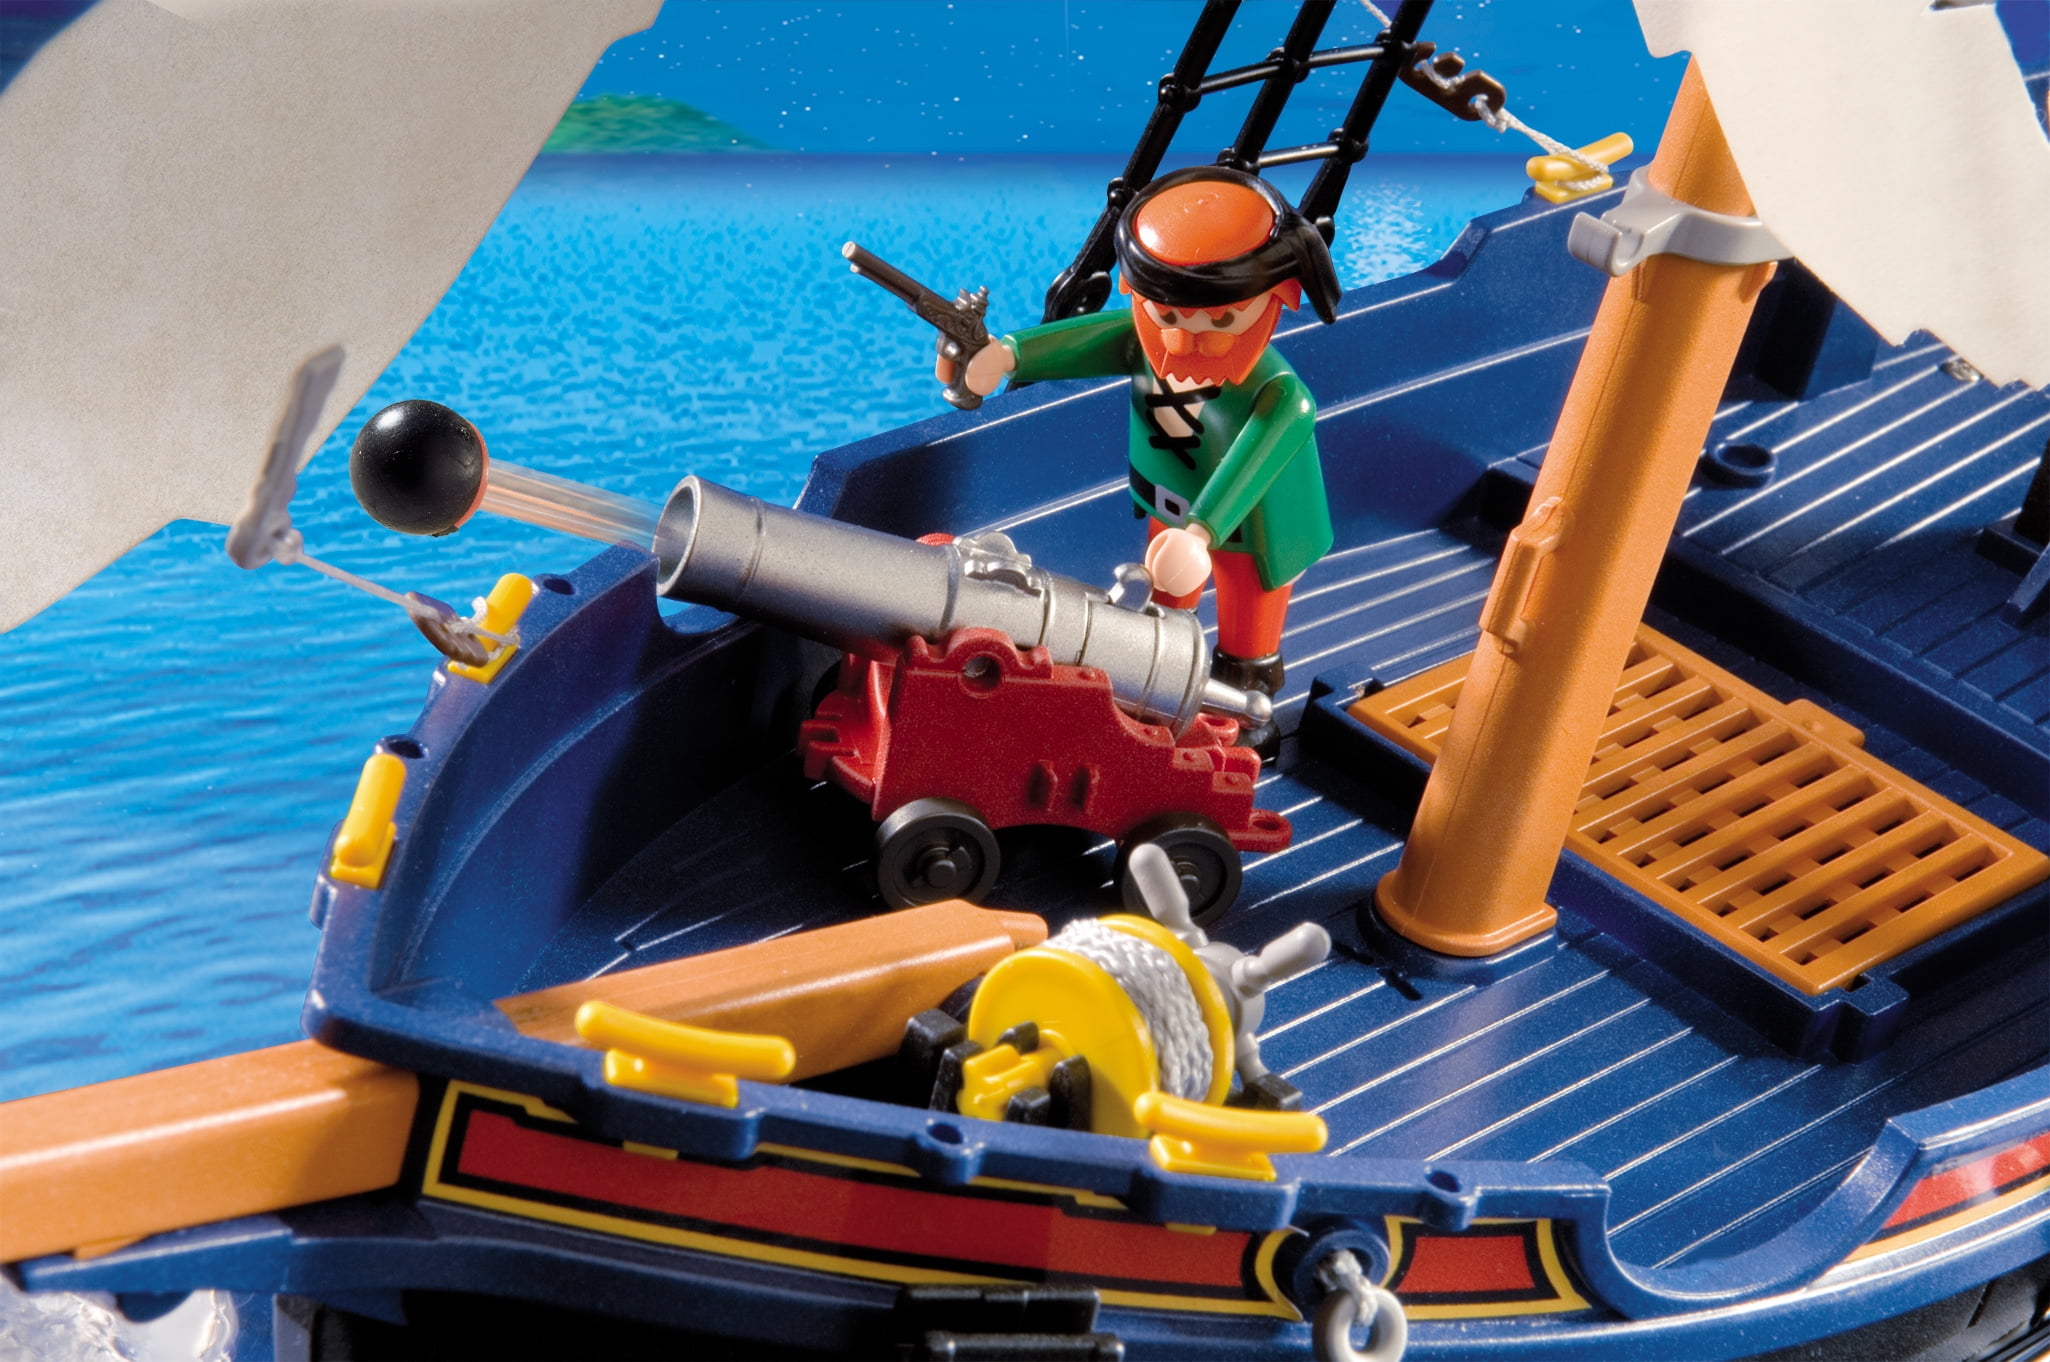 Details about   Playmobil 5810 Pirate Ship Corsair Boat with Figures & Accessories 